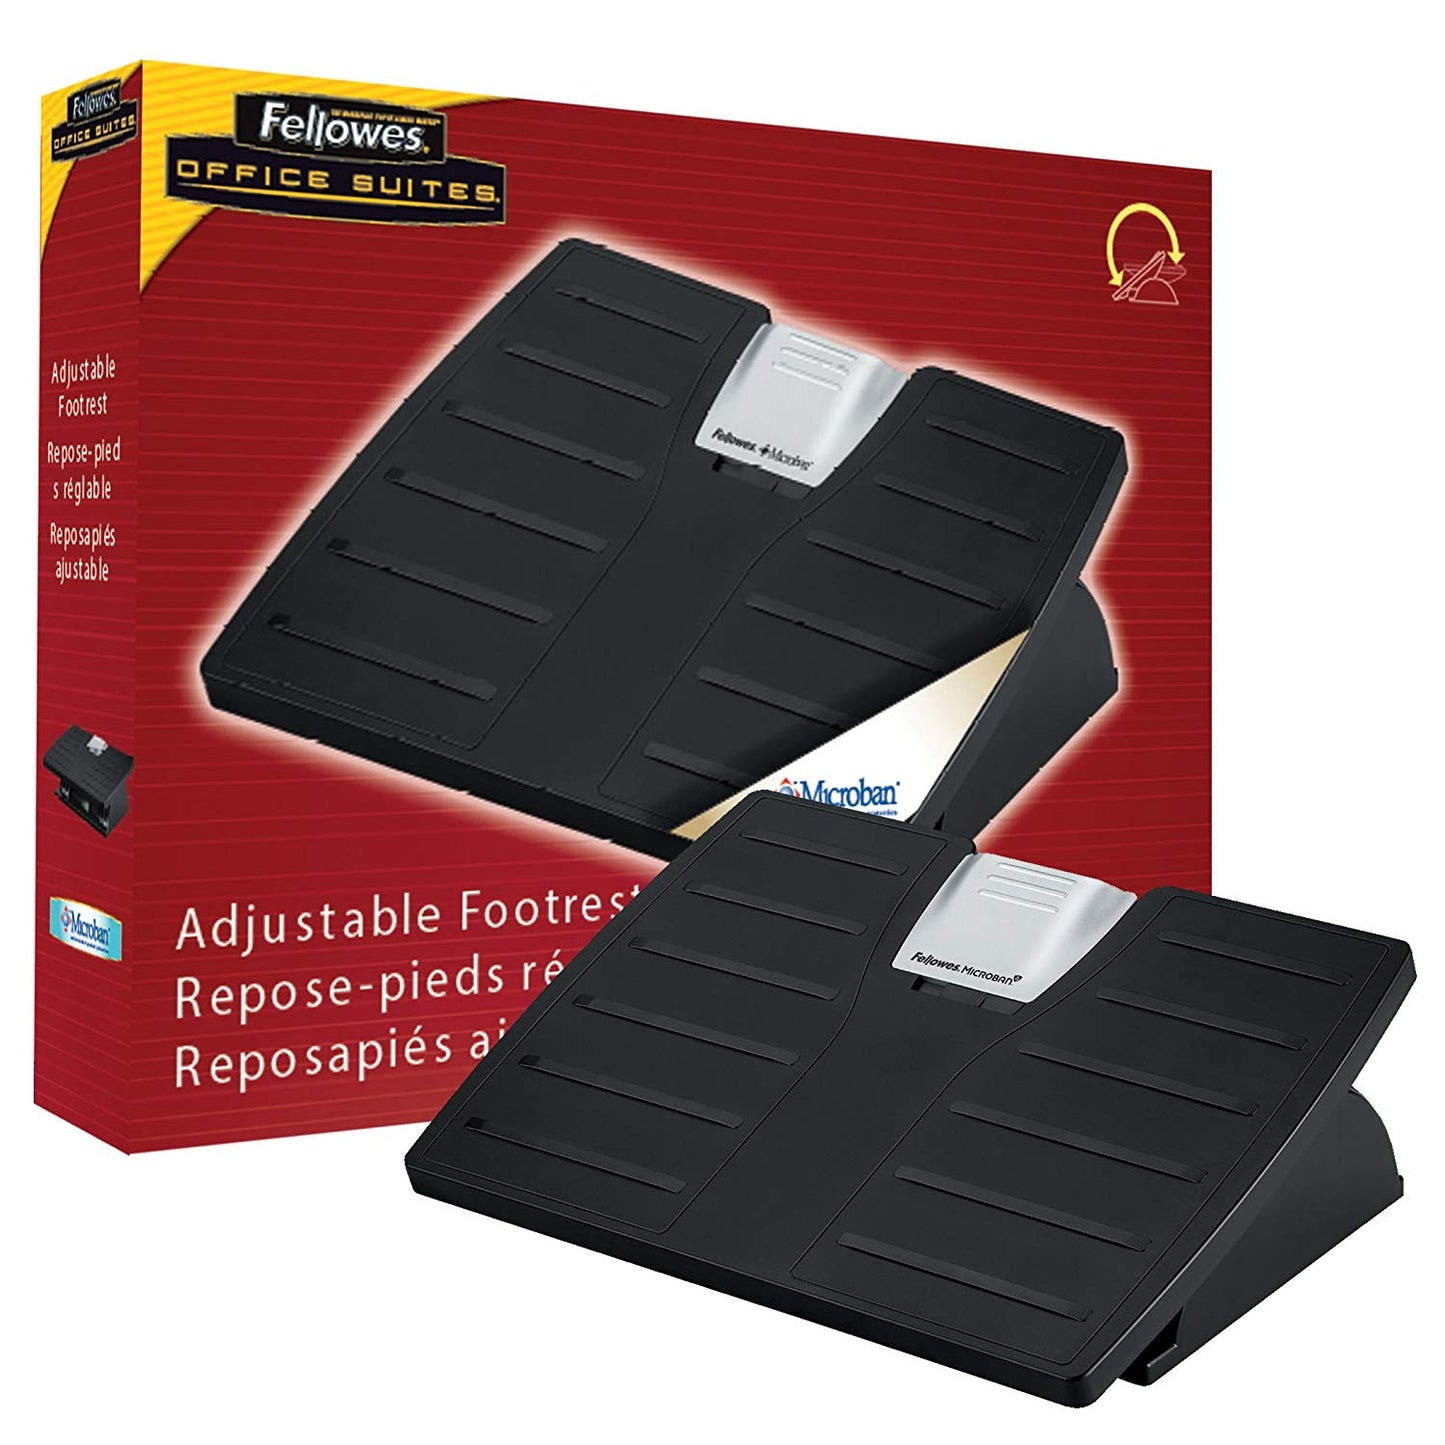 Fellowes Office Suites™ Adjustable Footrest with Microban Antimicrobial Protection - Black